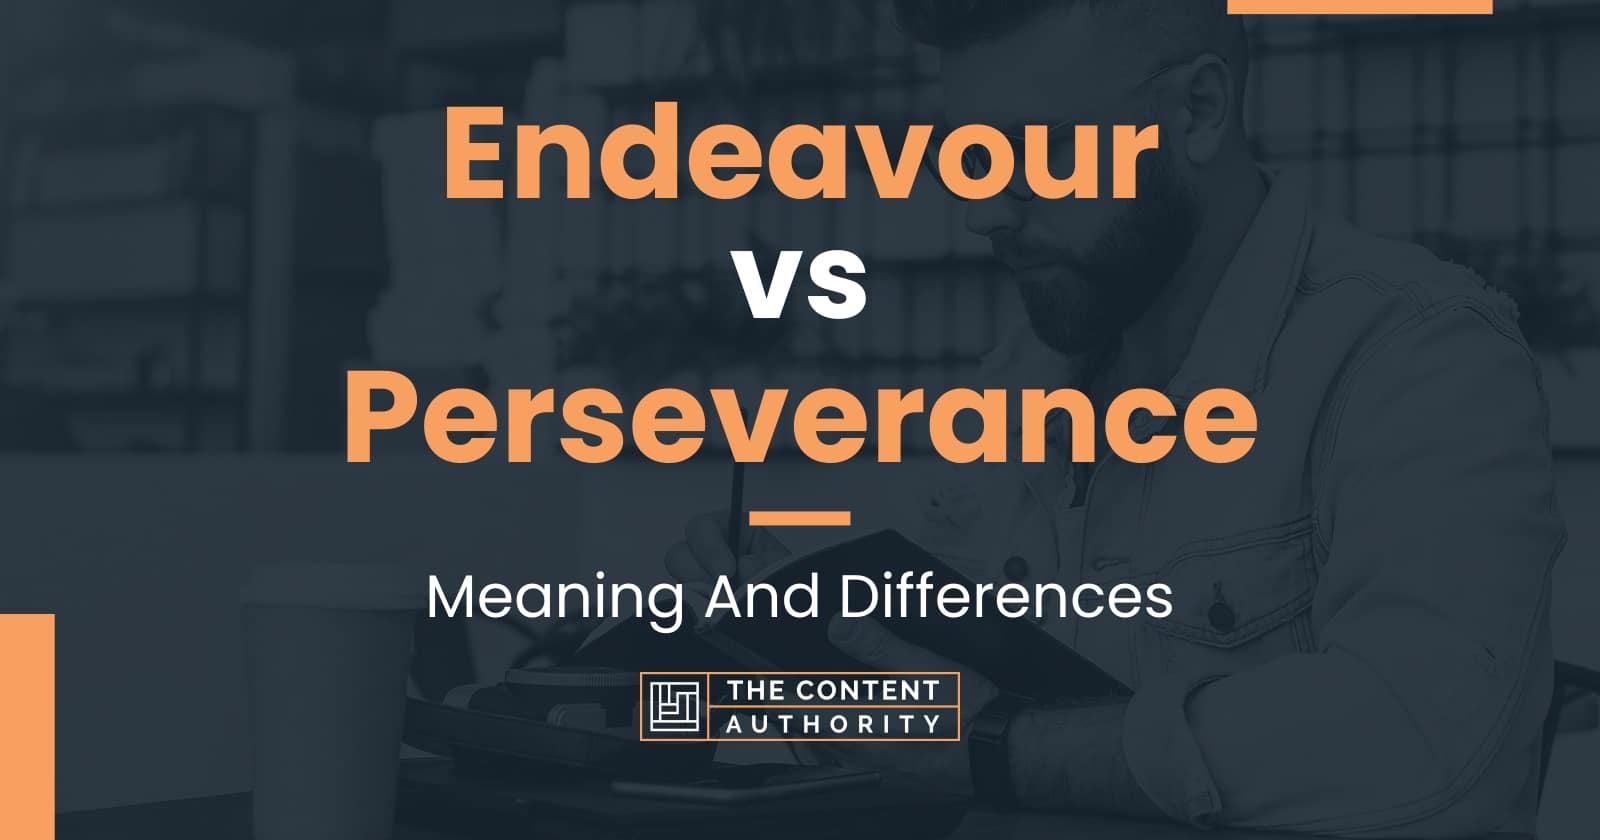 Endeavour vs Perseverance: Meaning And Differences